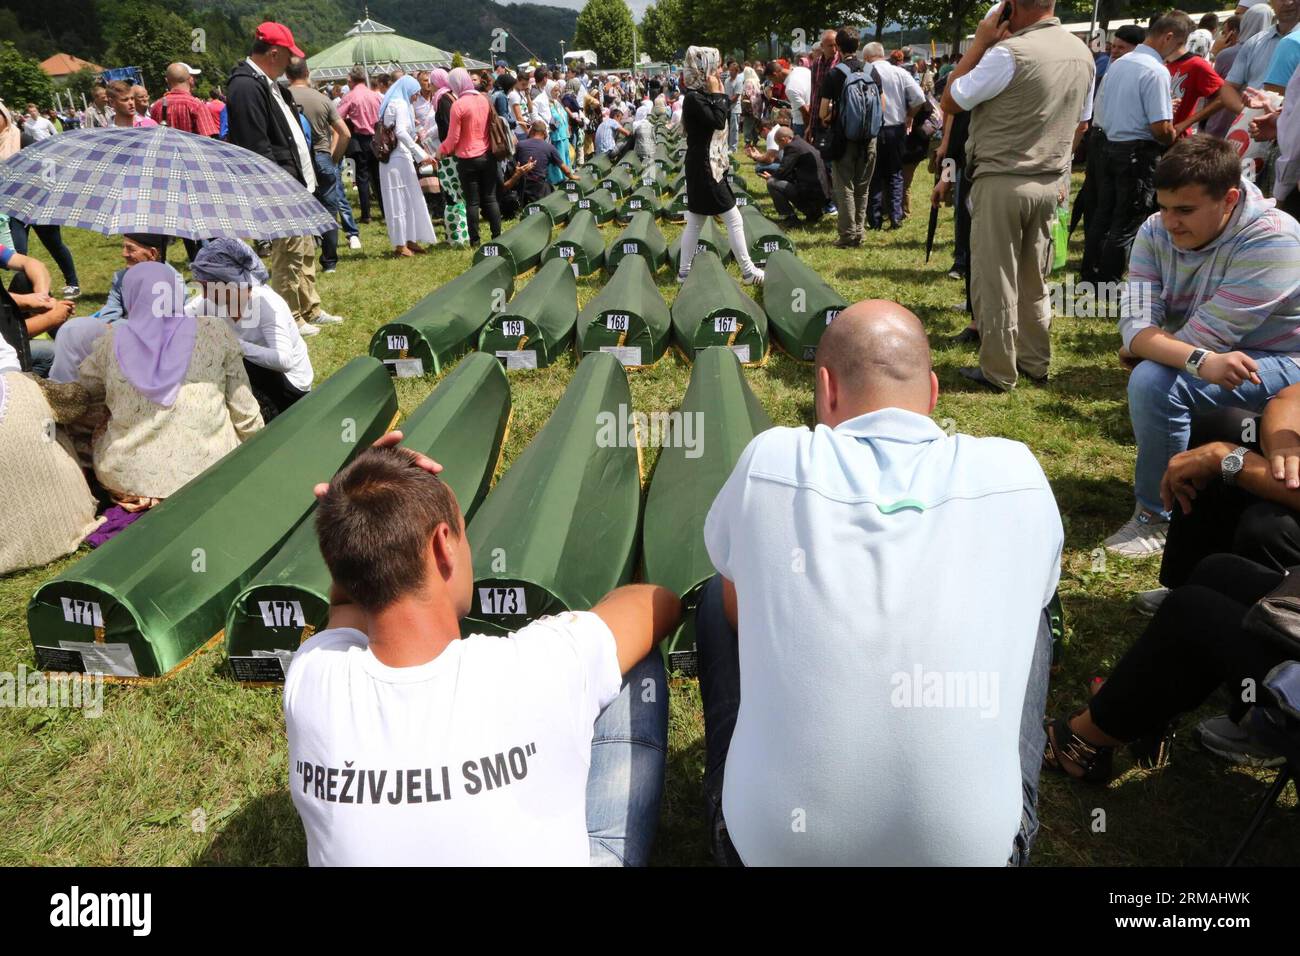 Relatives sitting next to coffins of the victims mourn before a funeral in Potocari, near Srebrenica, Bosnia and Herzegovina, July 11, 2014. The funeral of 175 recently identified victims was held here Friday to commemorate the 19th anniversary of the Srebrenica massacre. Some 7,000 Muslim men and boys were massacred in and near Srebrenica by Bosnian Serb forces in July 1995, the worst massacre in Europe since the end of World War II. (Xinhua/Haris Memija) (zjl) BIH-SREBRENICA-MASSACRE-19TH ANIVERSARY PUBLICATIONxNOTxINxCHN   Relatives Sitting Next to Coffin of The Victims Morne Before a Funer Stock Photo